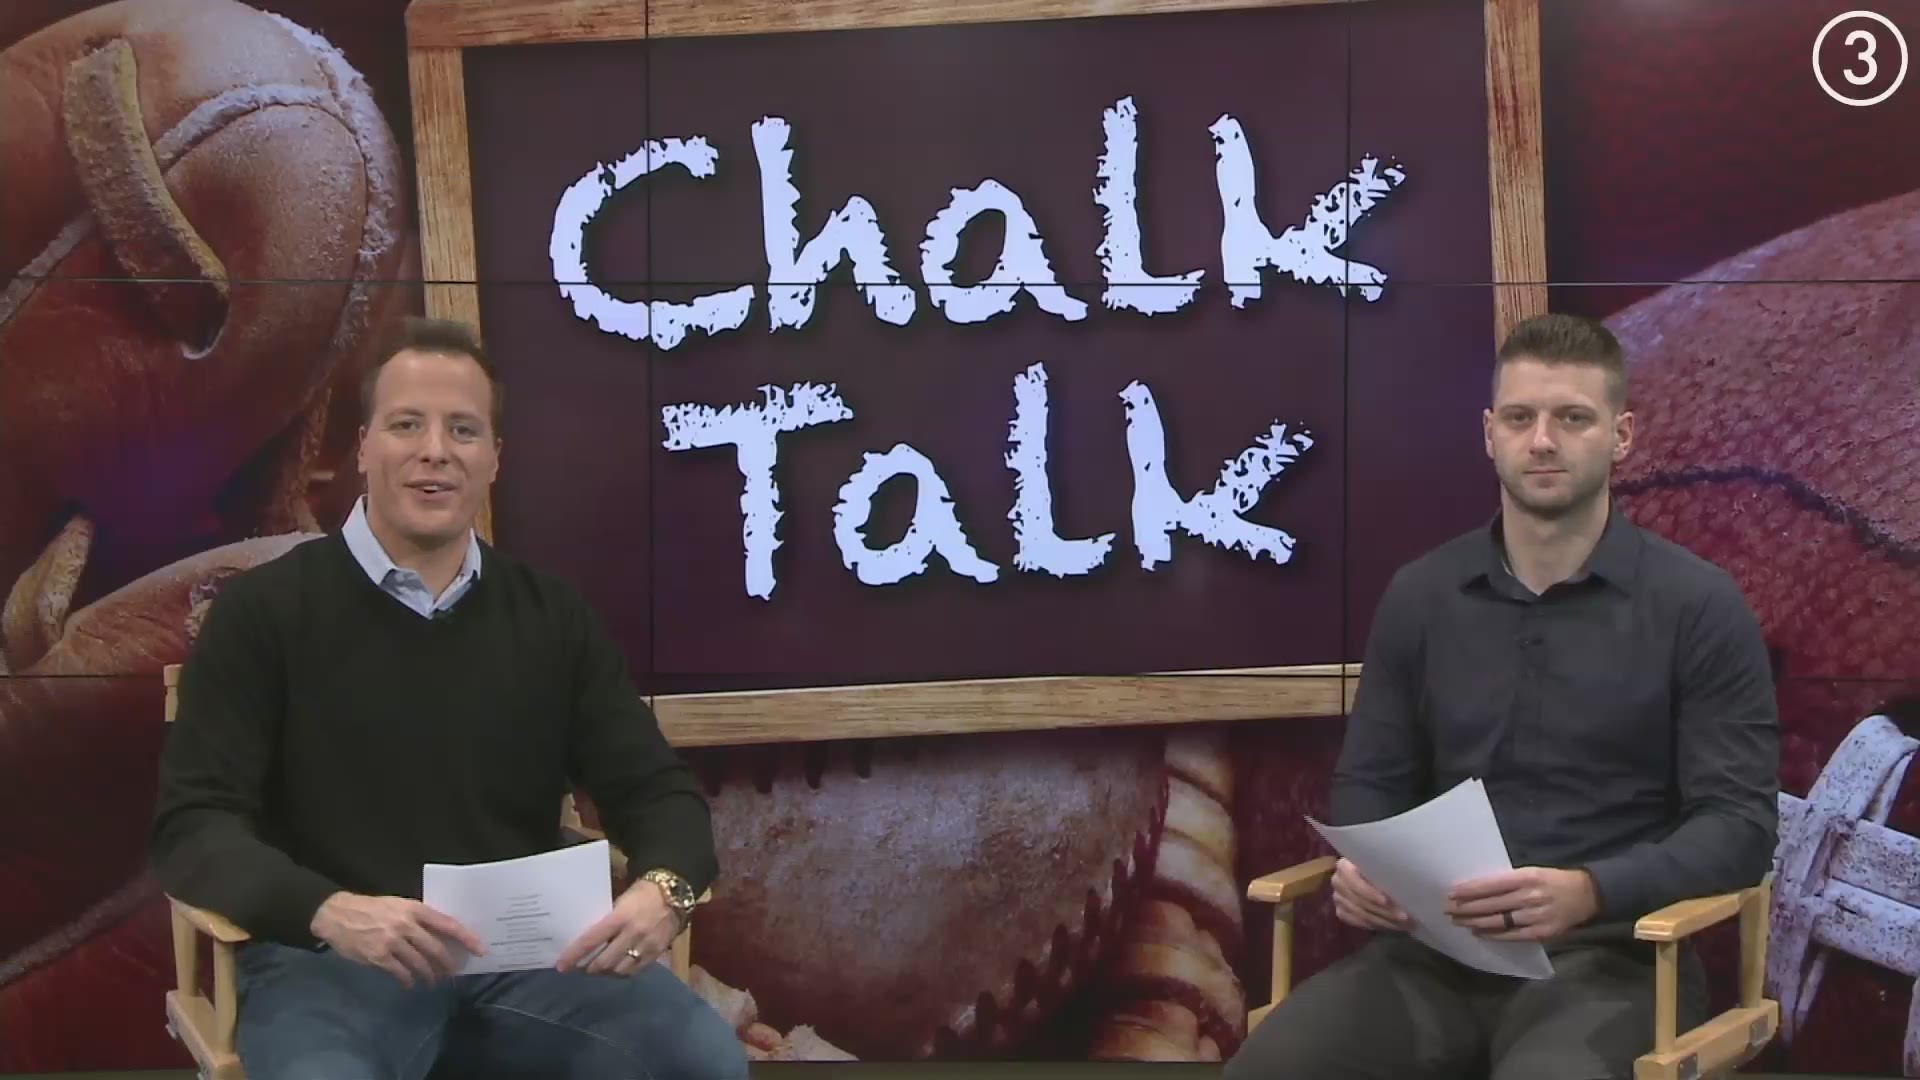 On the 10th episode of WKYC's Chalk Talk, Nick Camino and Ben Axelrod discuss and make their picks for Week 11 of the college football season and Week 10 of the NFL.